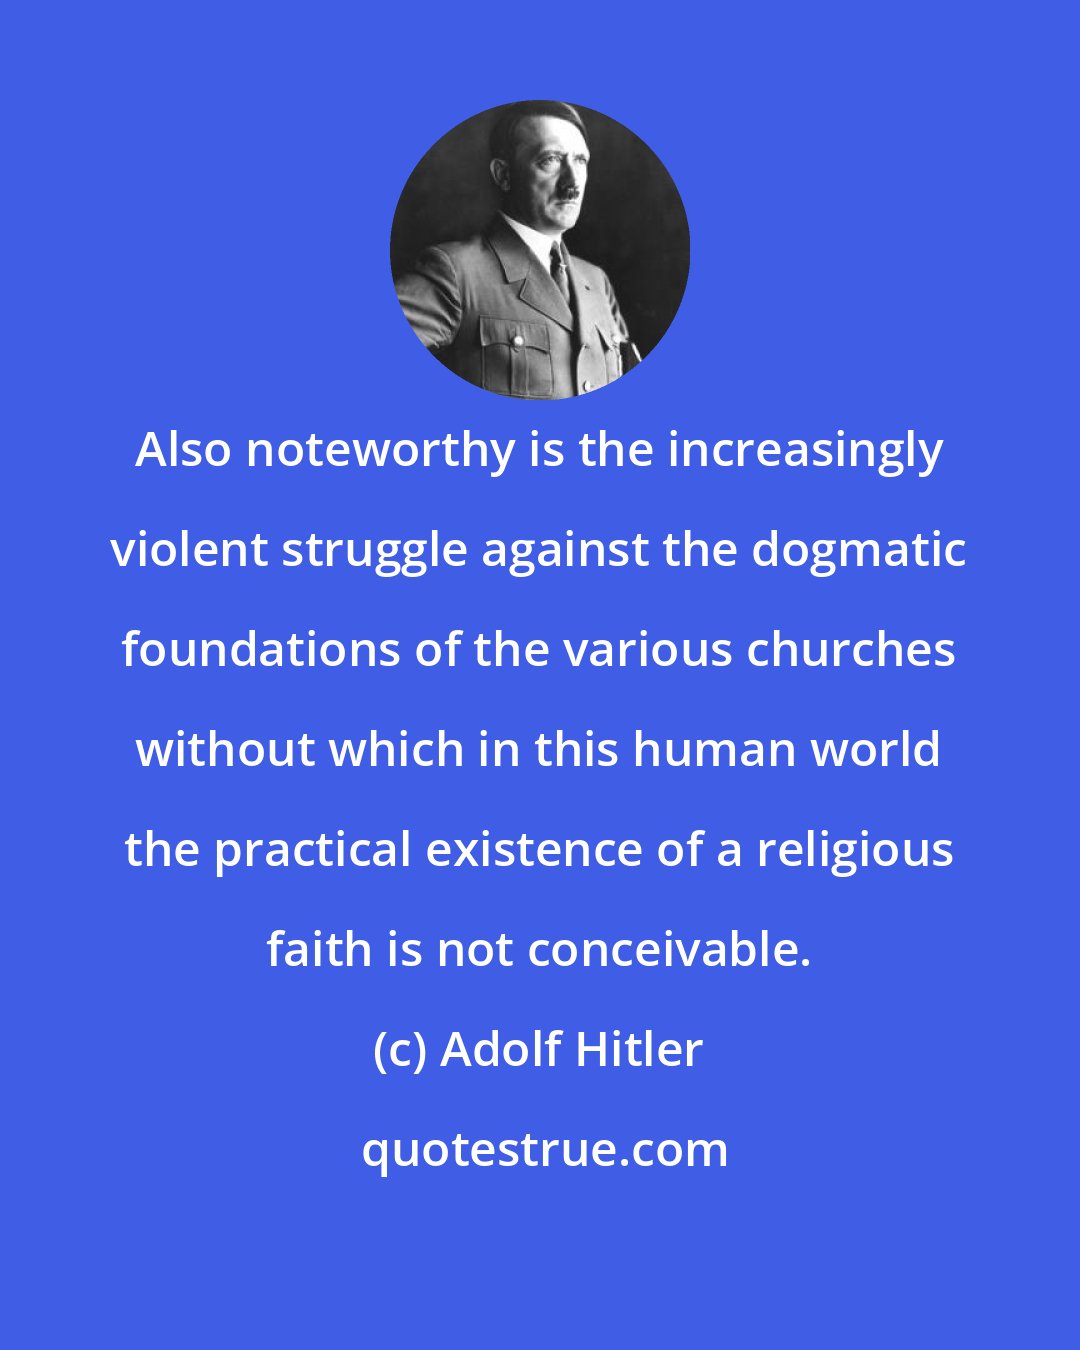 Adolf Hitler: Also noteworthy is the increasingly violent struggle against the dogmatic foundations of the various churches without which in this human world the practical existence of a religious faith is not conceivable.